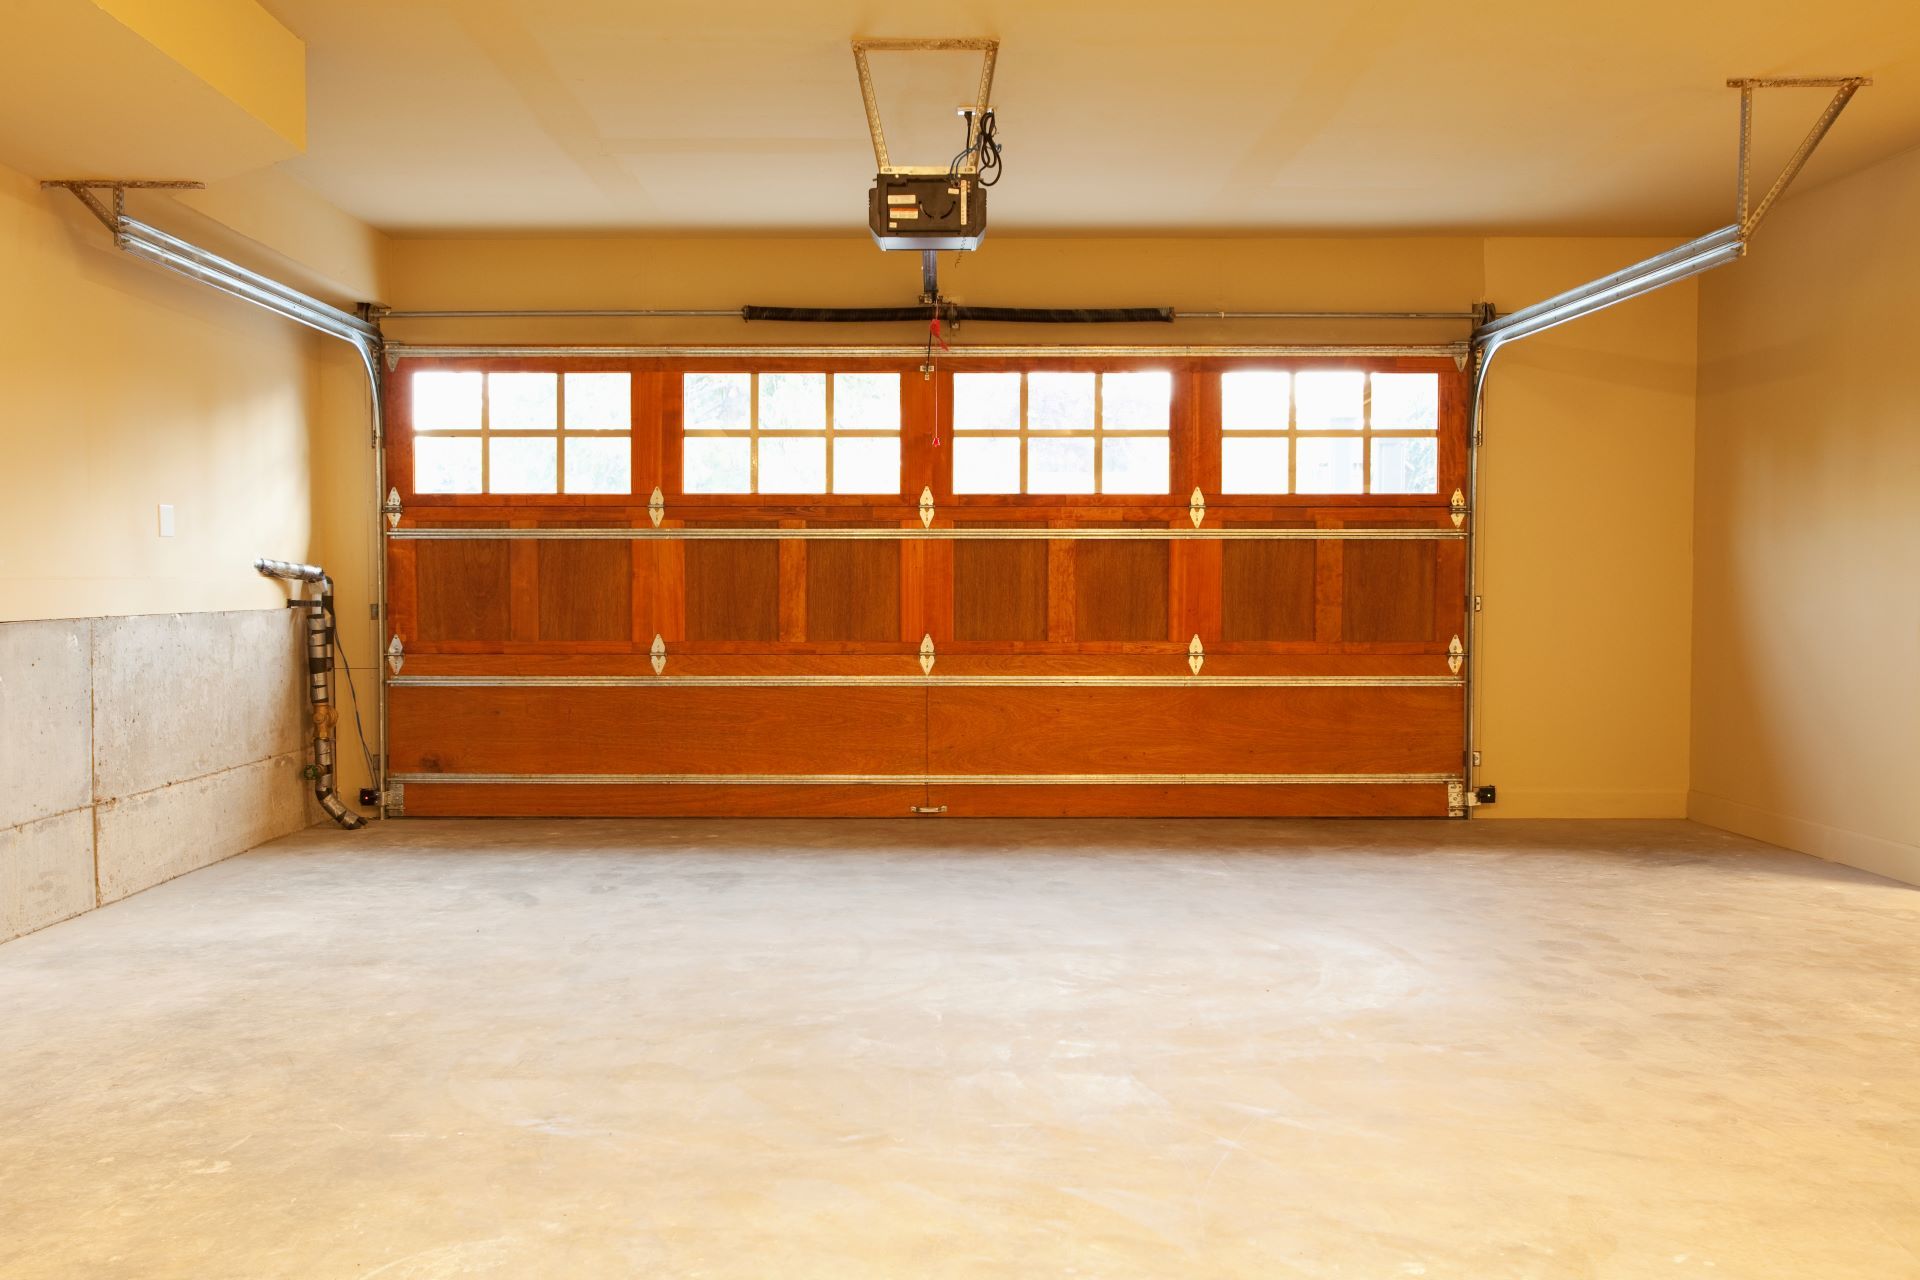 An empty garage with a wooden garage door and a lift.